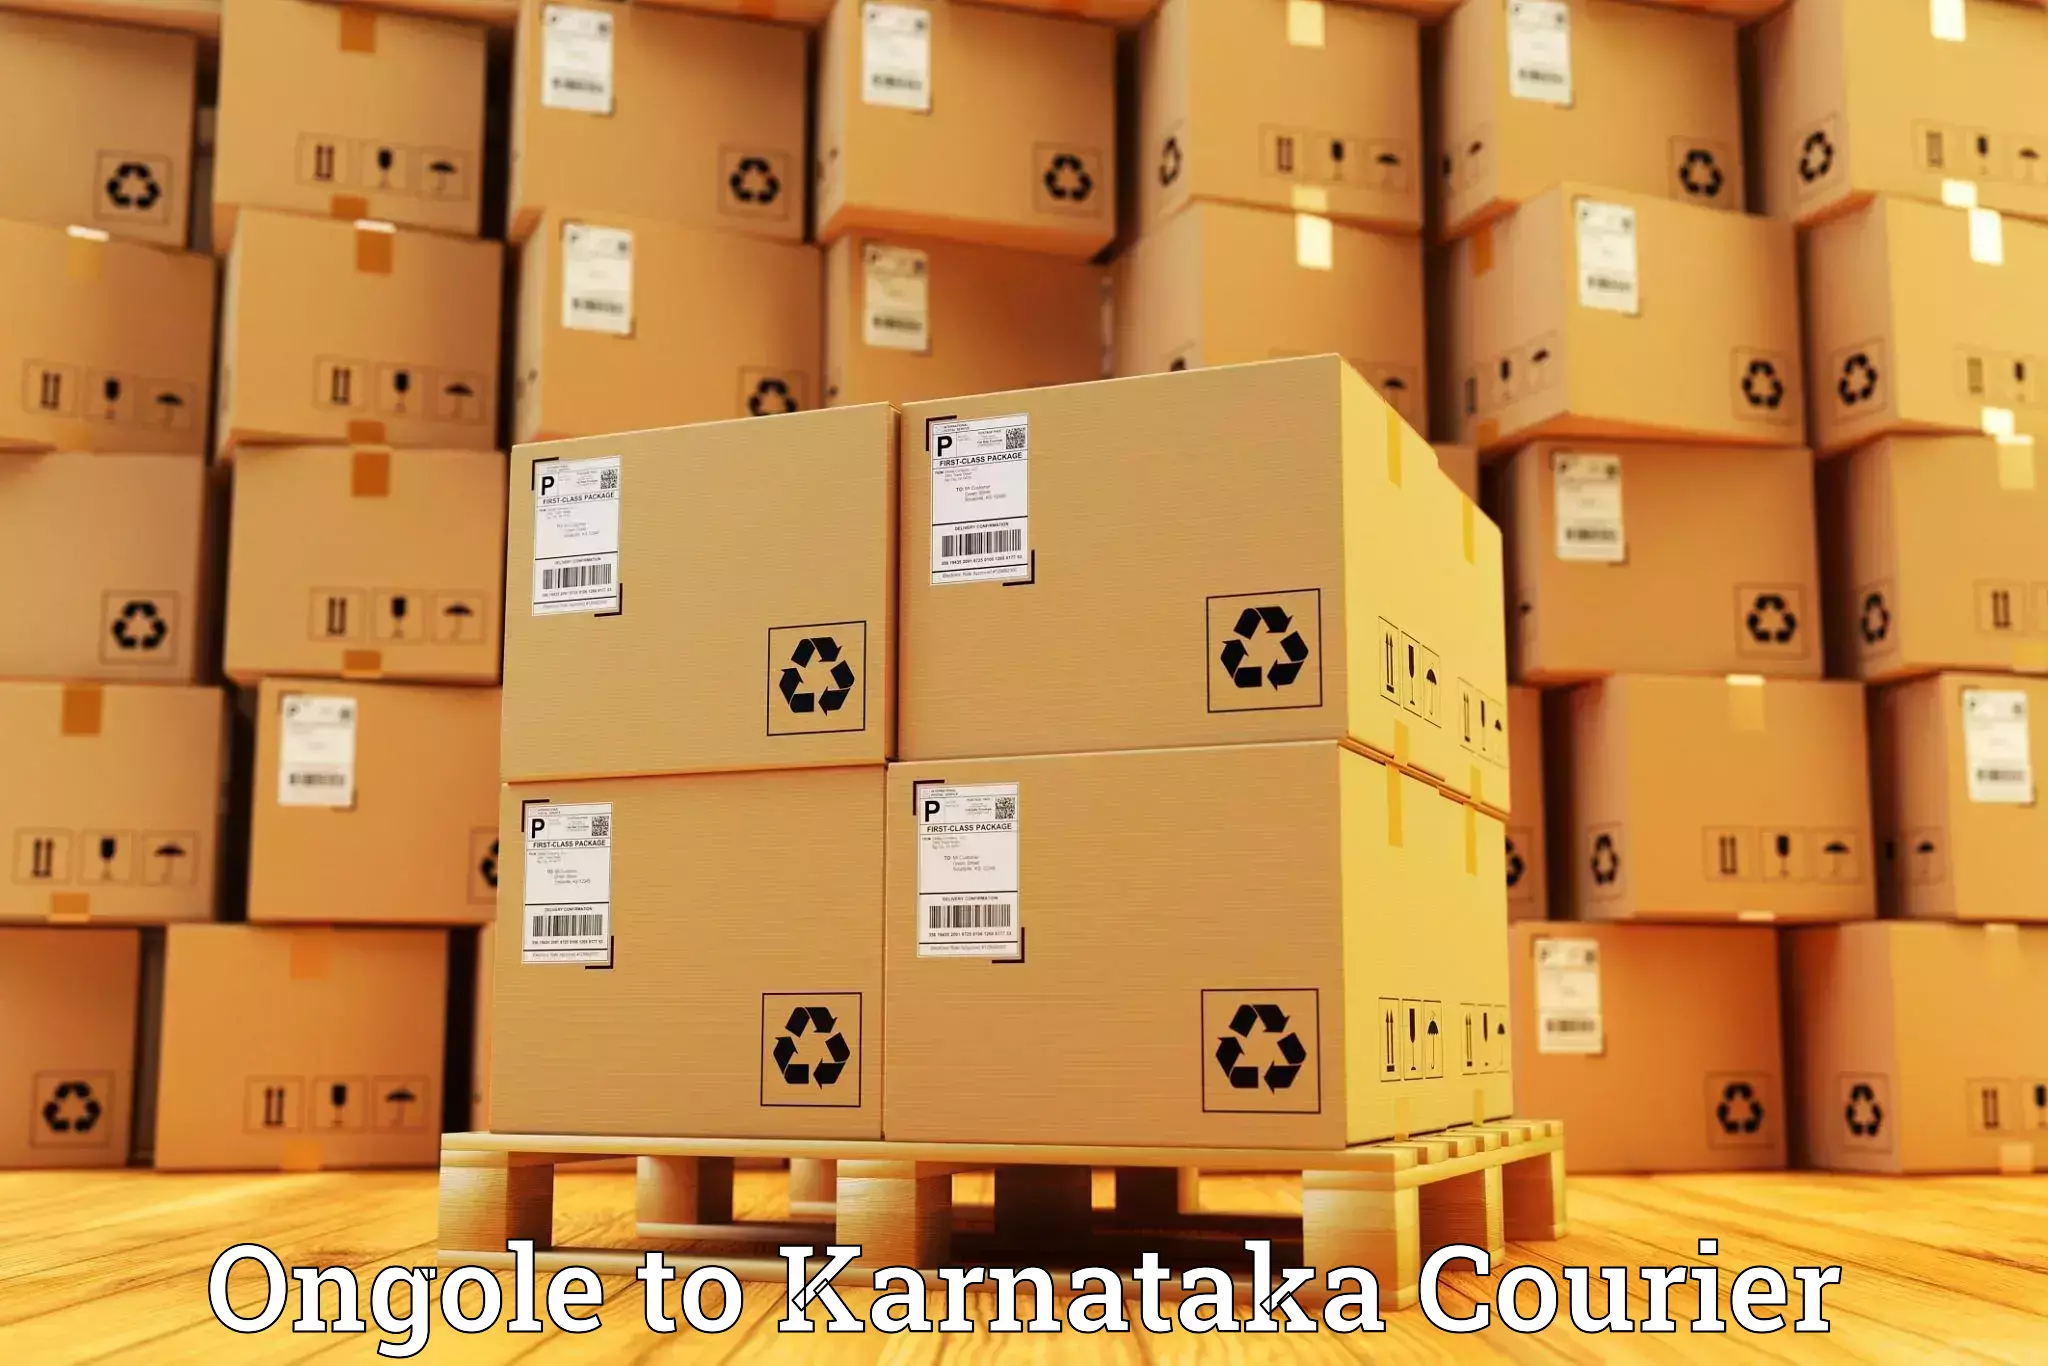 International courier networks Ongole to Nanjangud